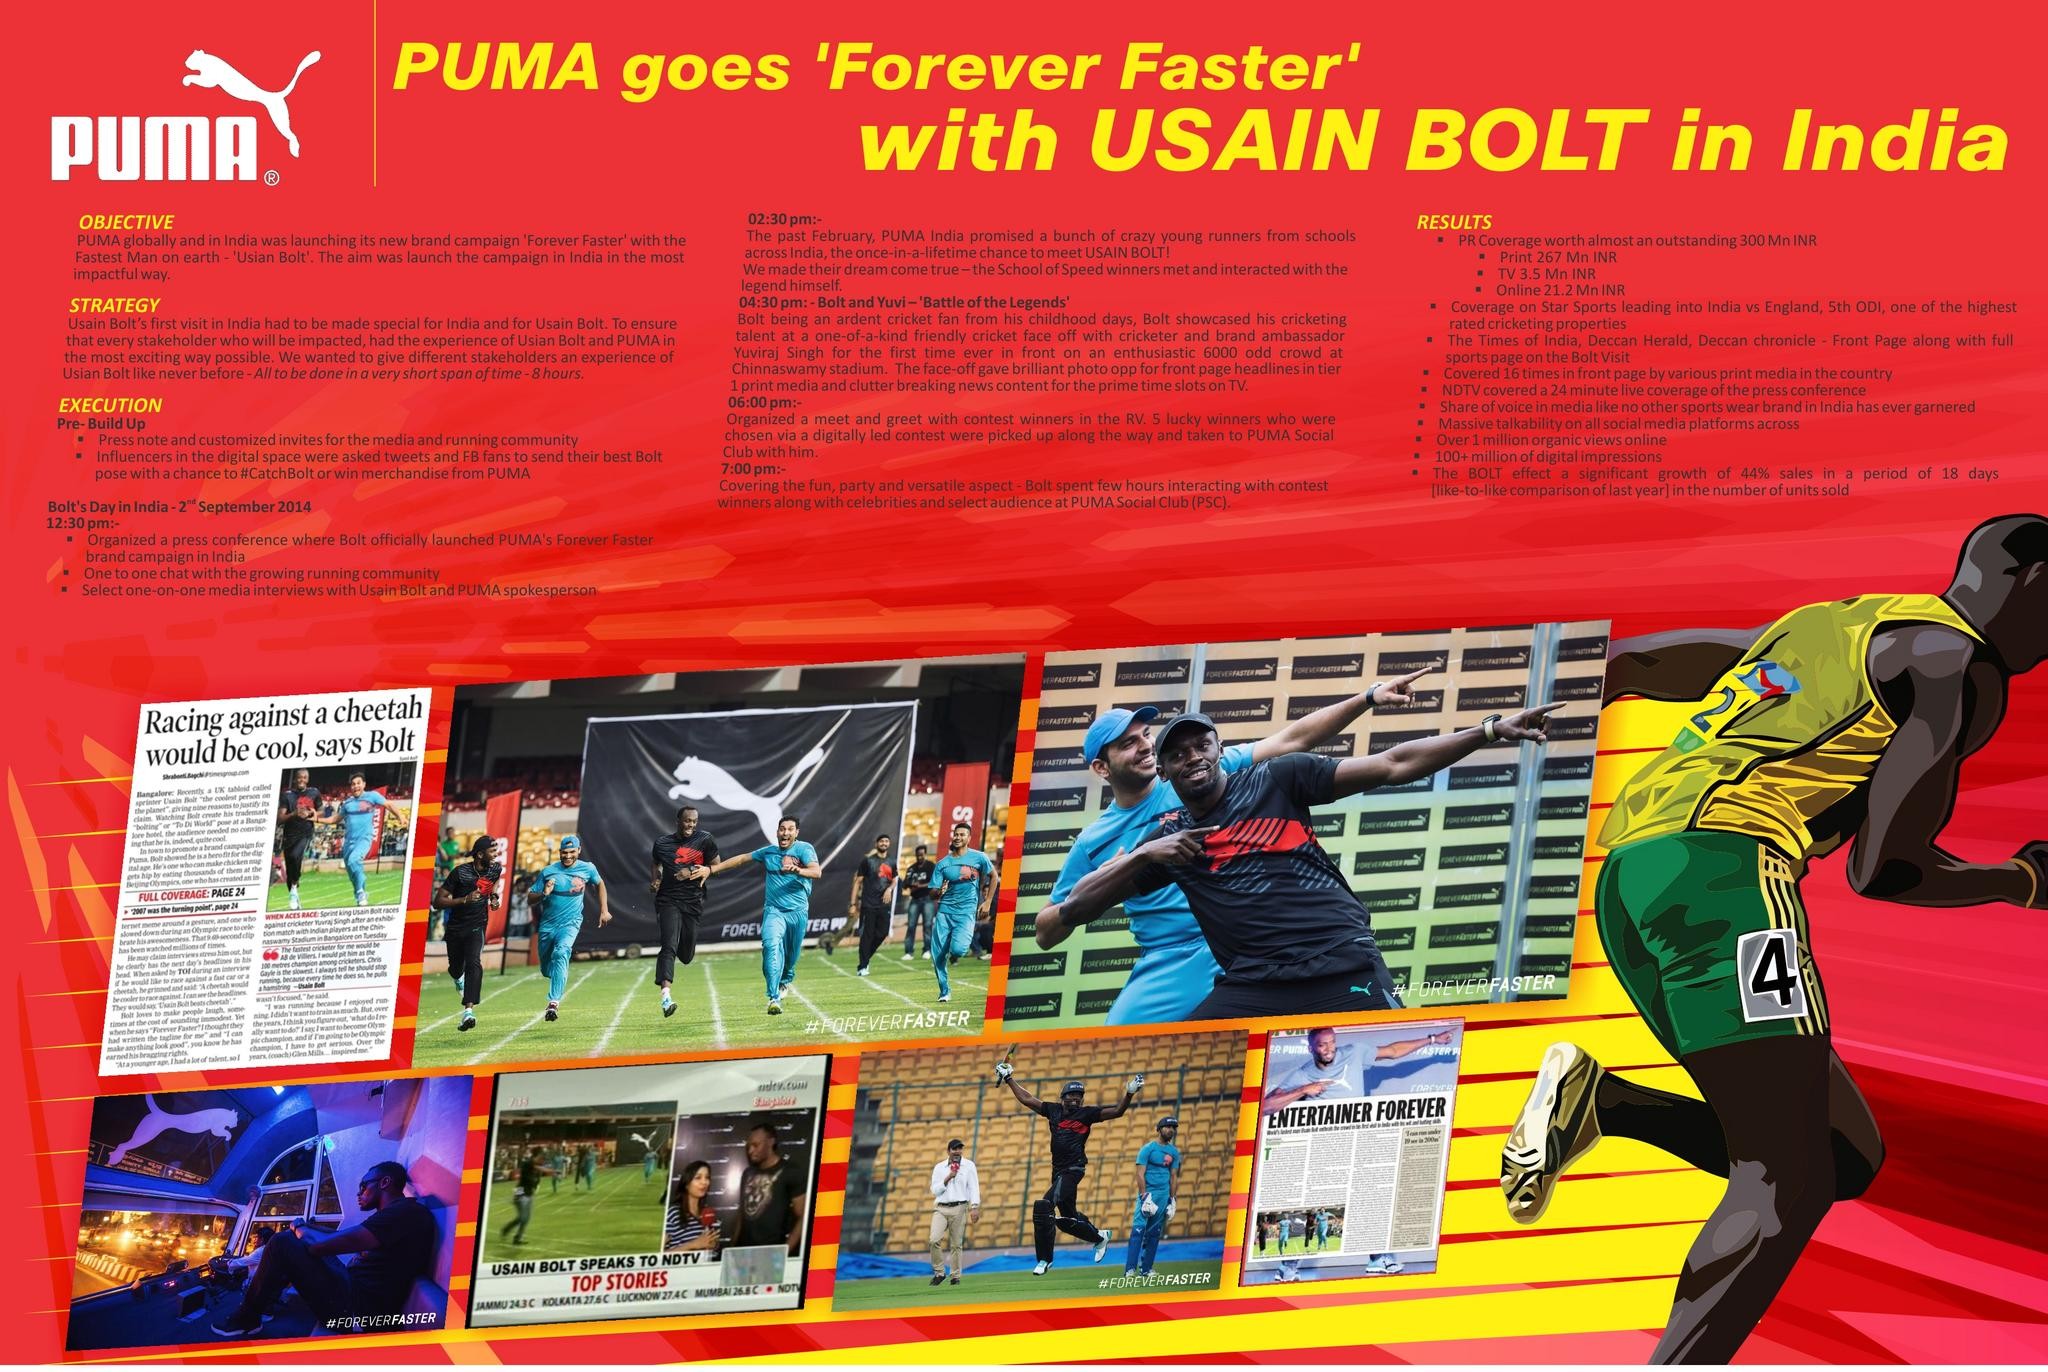 PUMA GOES 'FOREVER FASTER' WITH USAIN BOLT IN INDIA